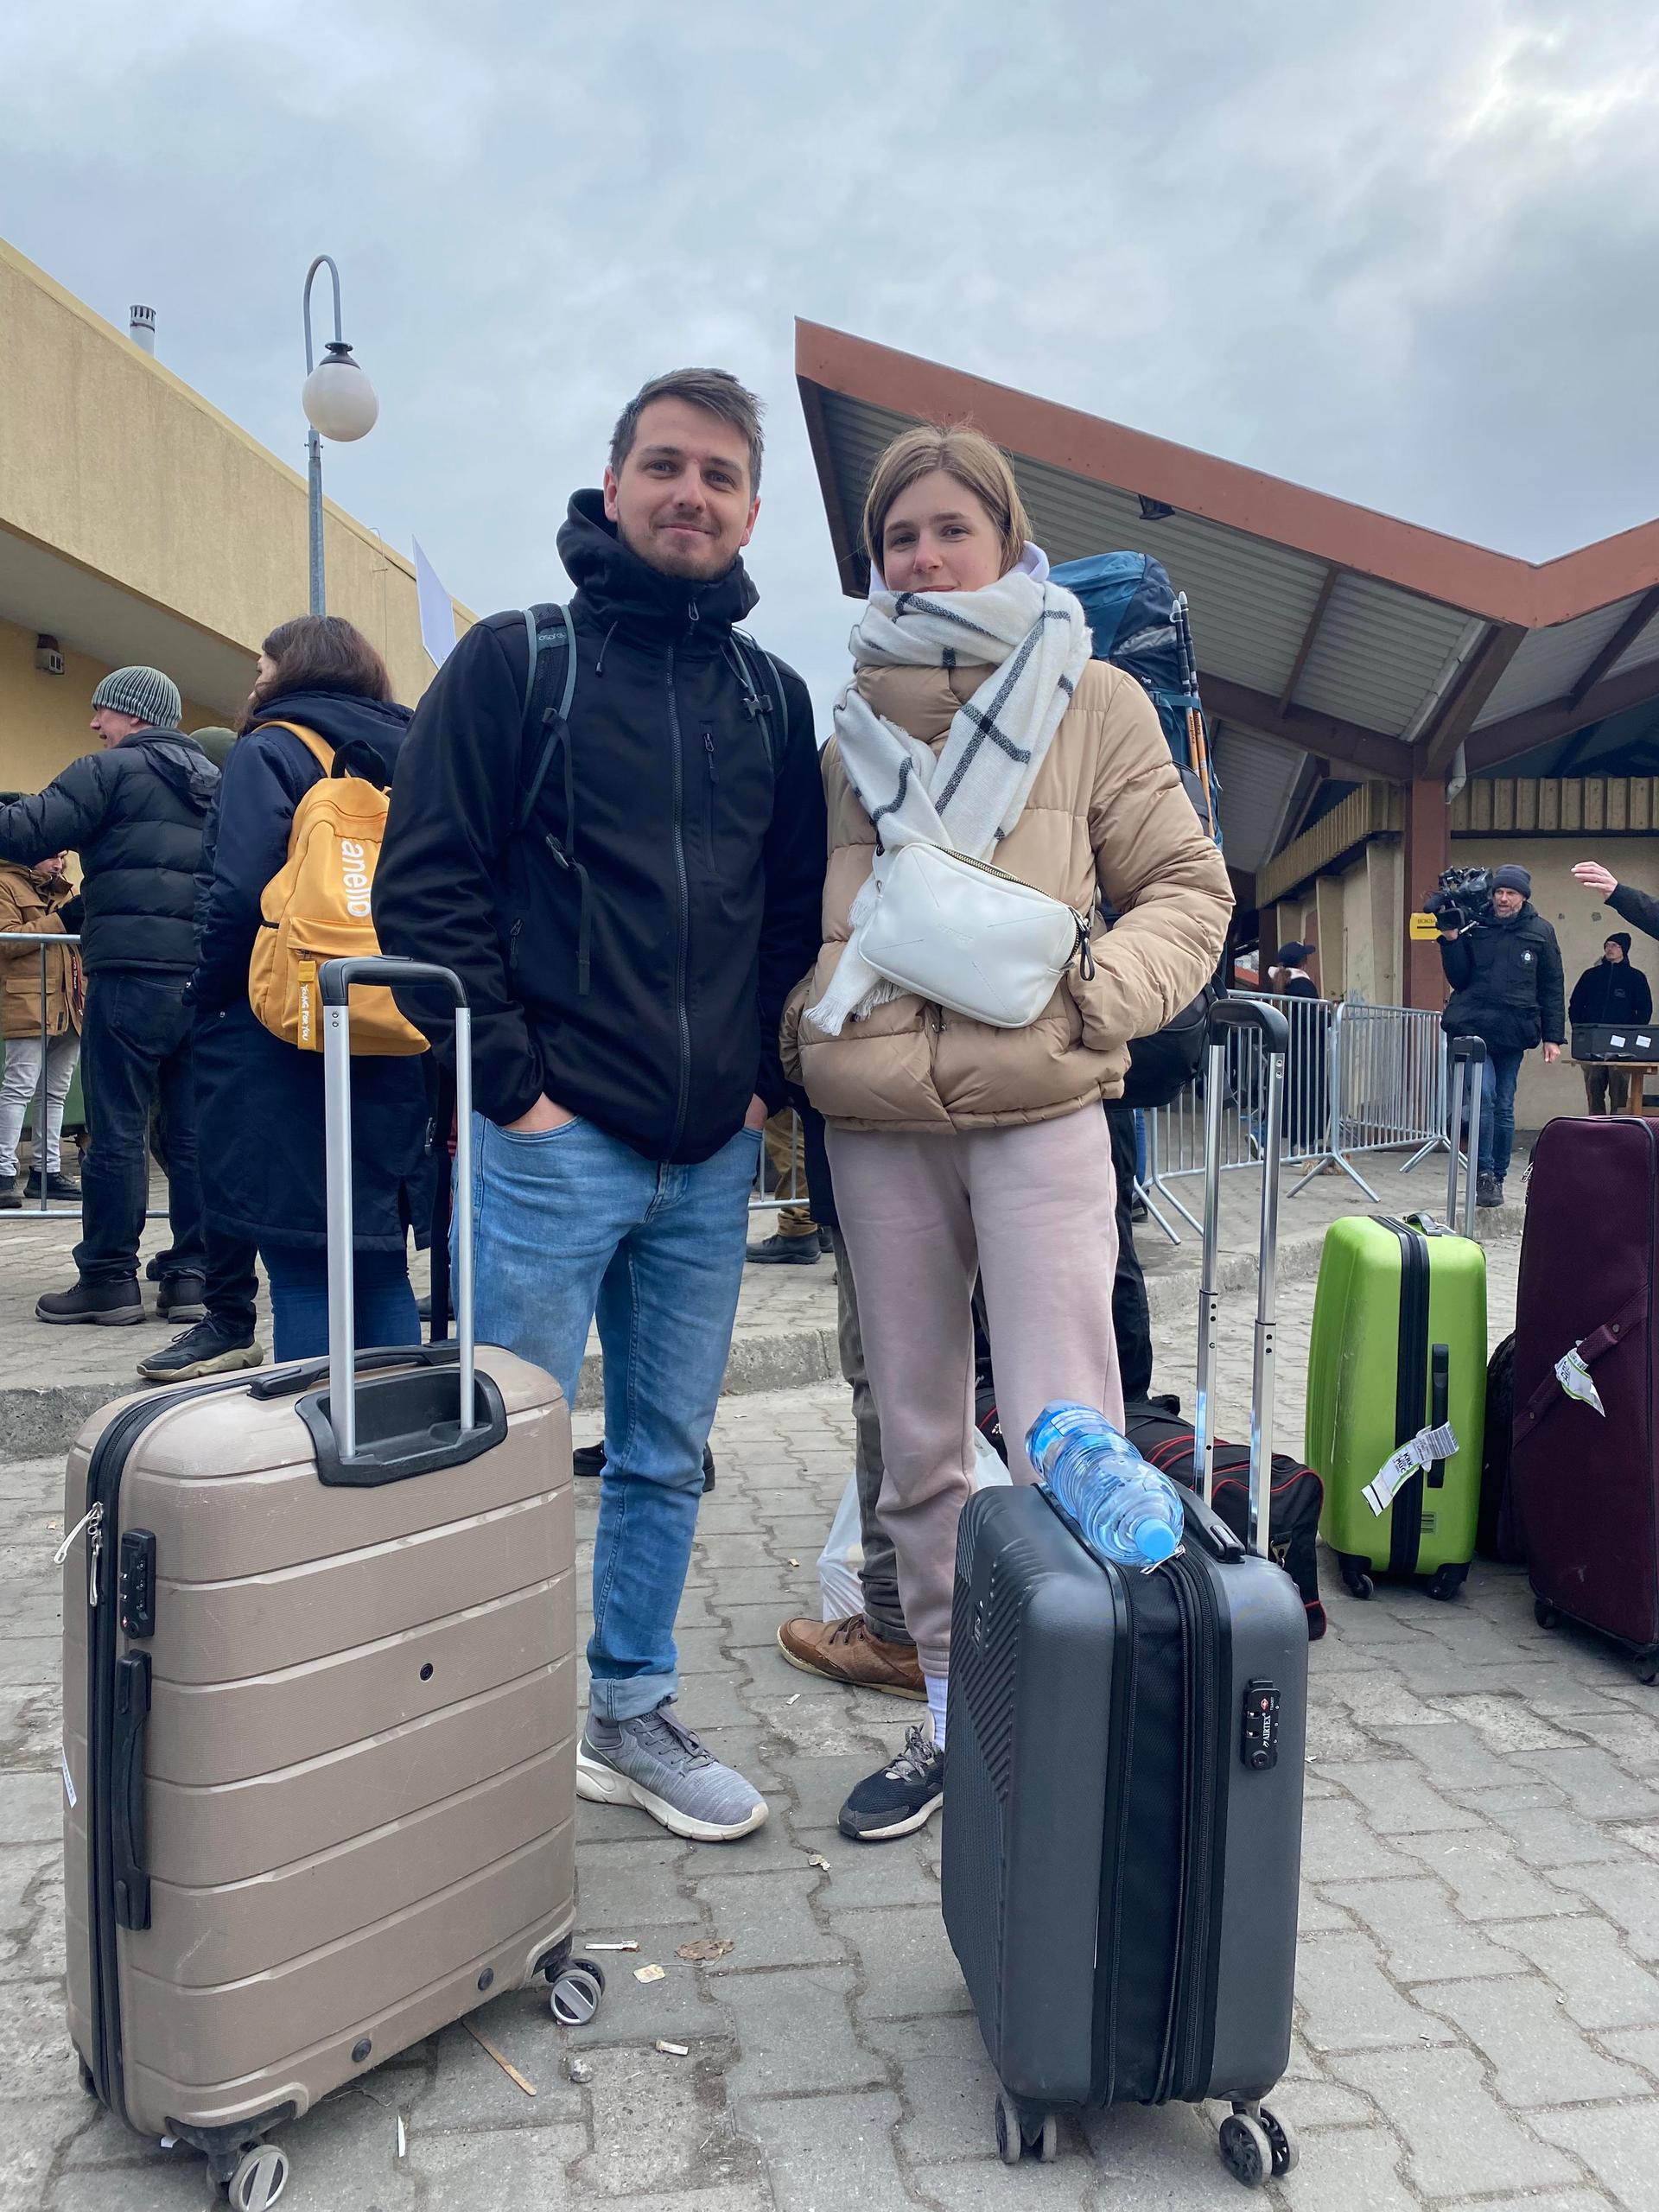 Yevhenii Vladimirtsev and Natalia Osinchuk were on vacation in Sri Lanka when war broke out. They now intend to volunteer for the army and refugee organisations in their hometown Lviv.